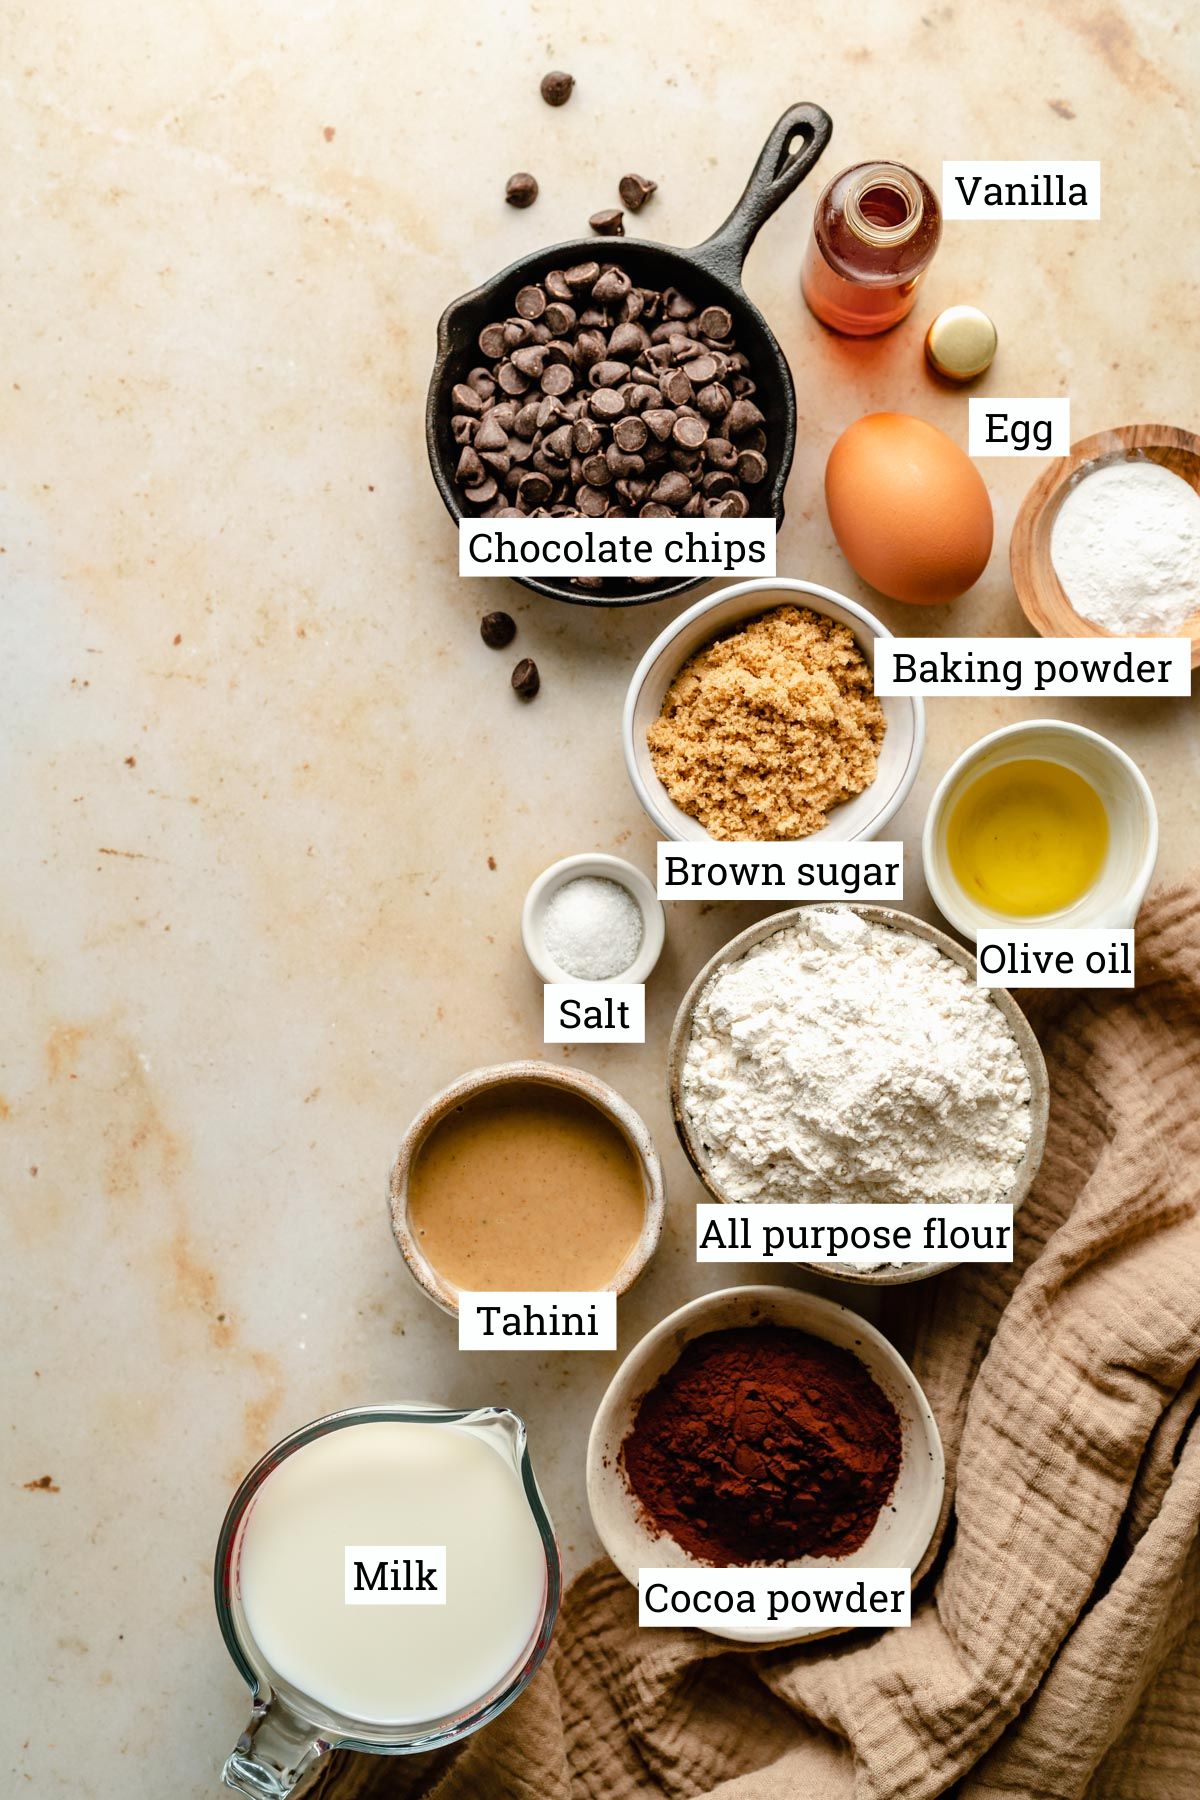 Array of ingredients for drop pancakes in various bowls including cocoa powder.